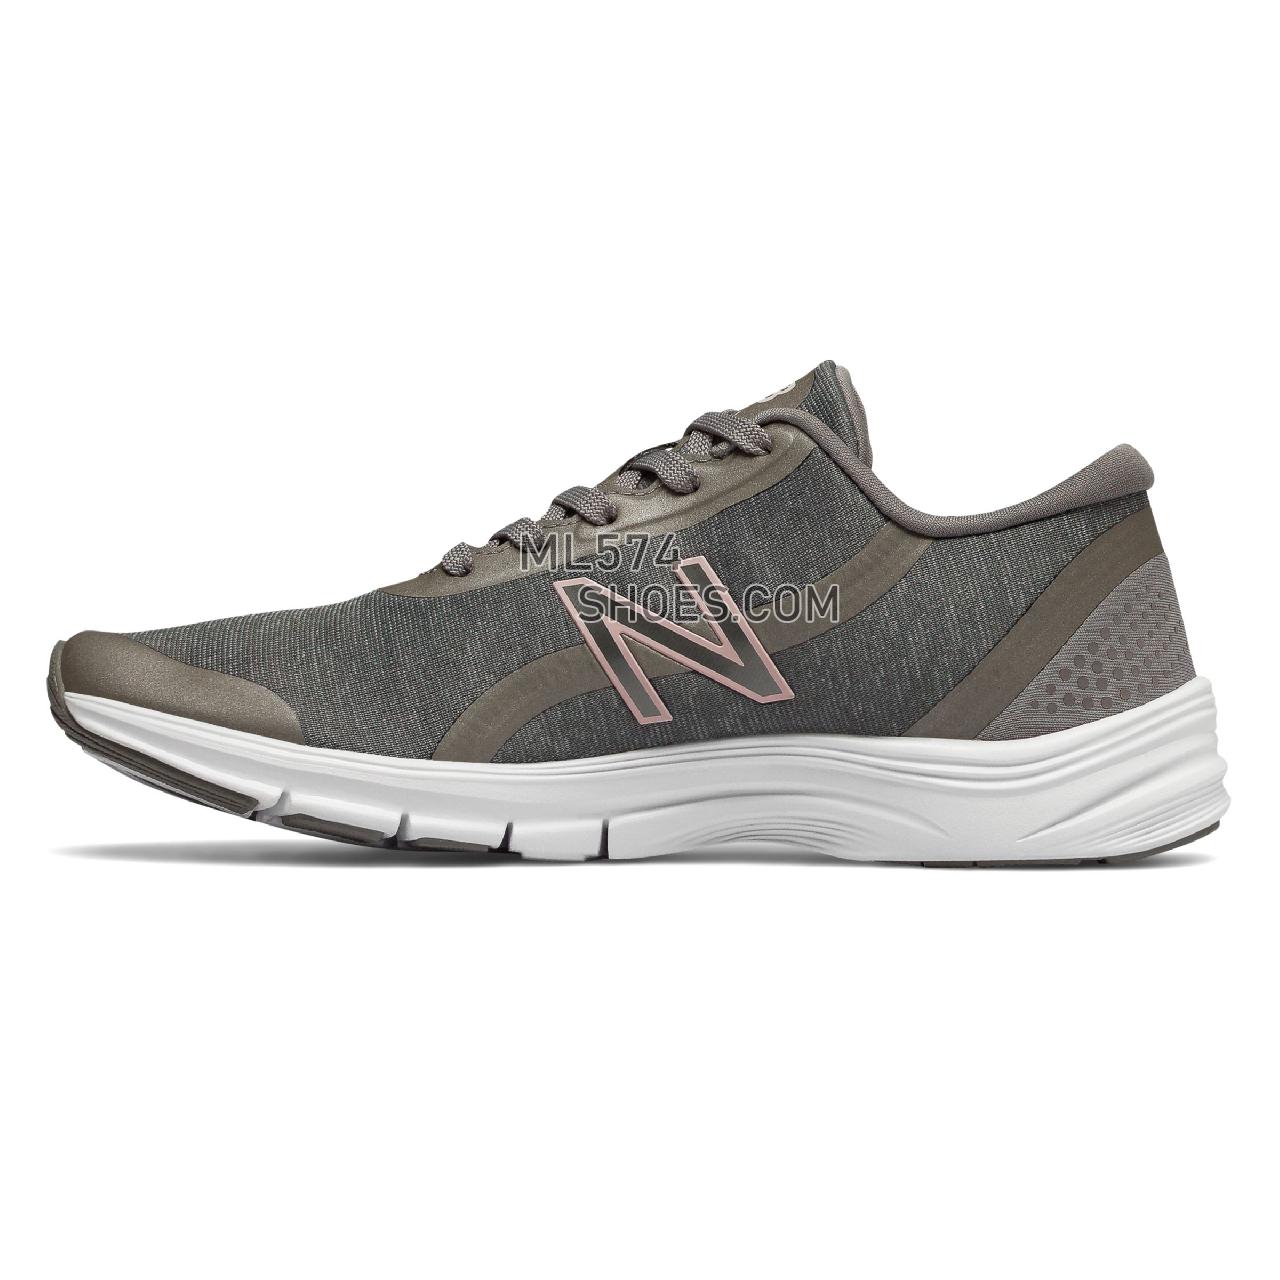 New Balance 711v3 Mesh Trainer - Women's 711 - X-training Marblehead with Conch Shell - WX711MC3